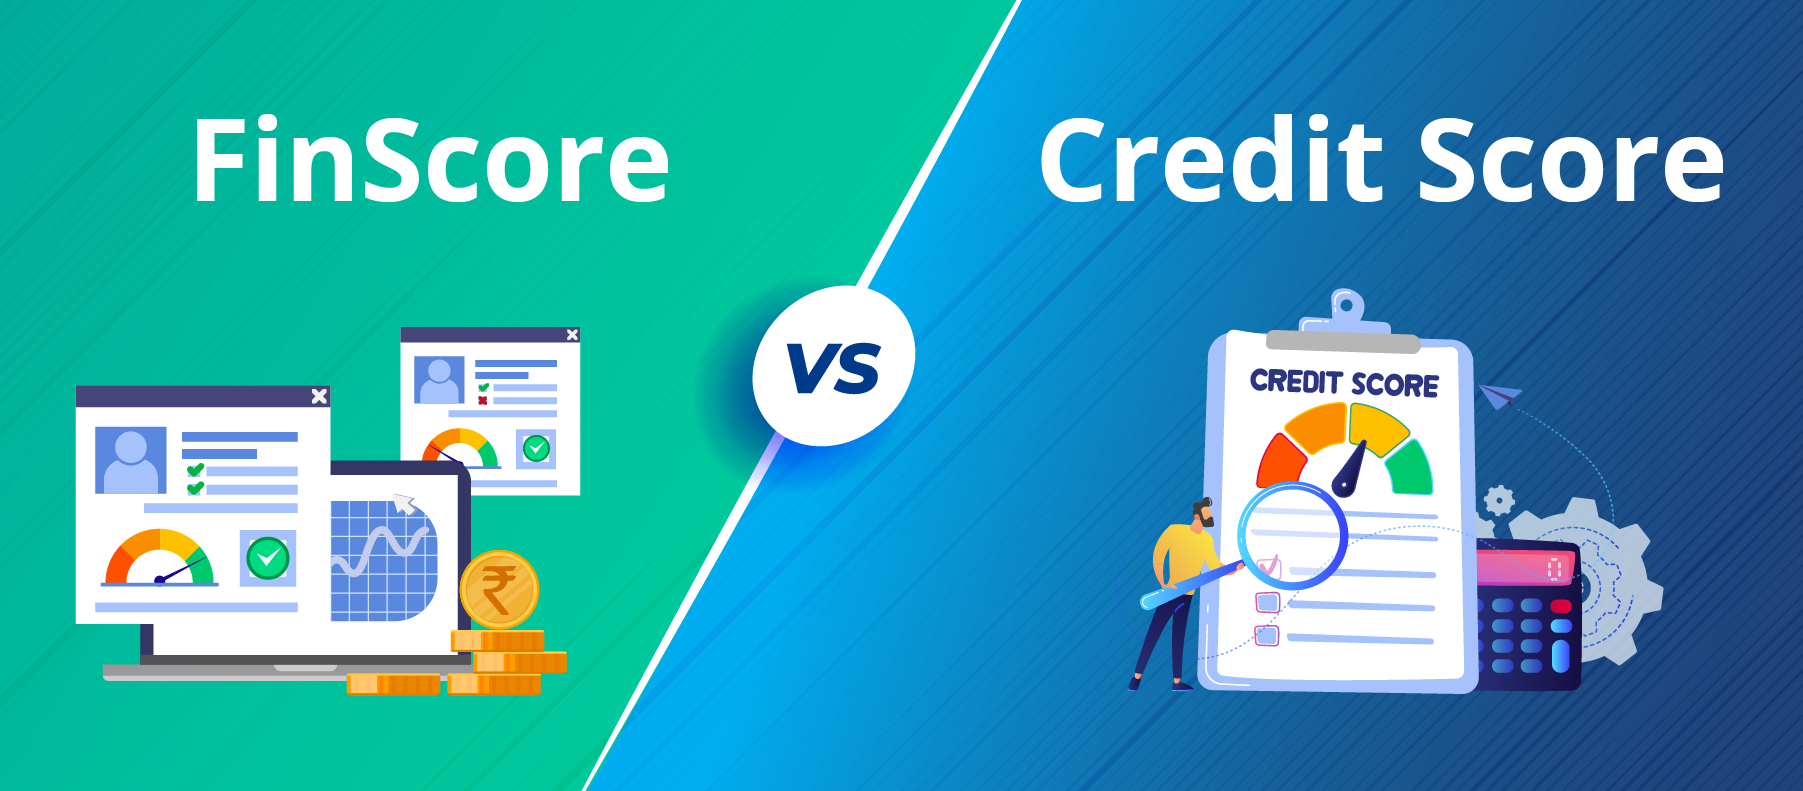 Finscore vs credit score all the diffrences between them